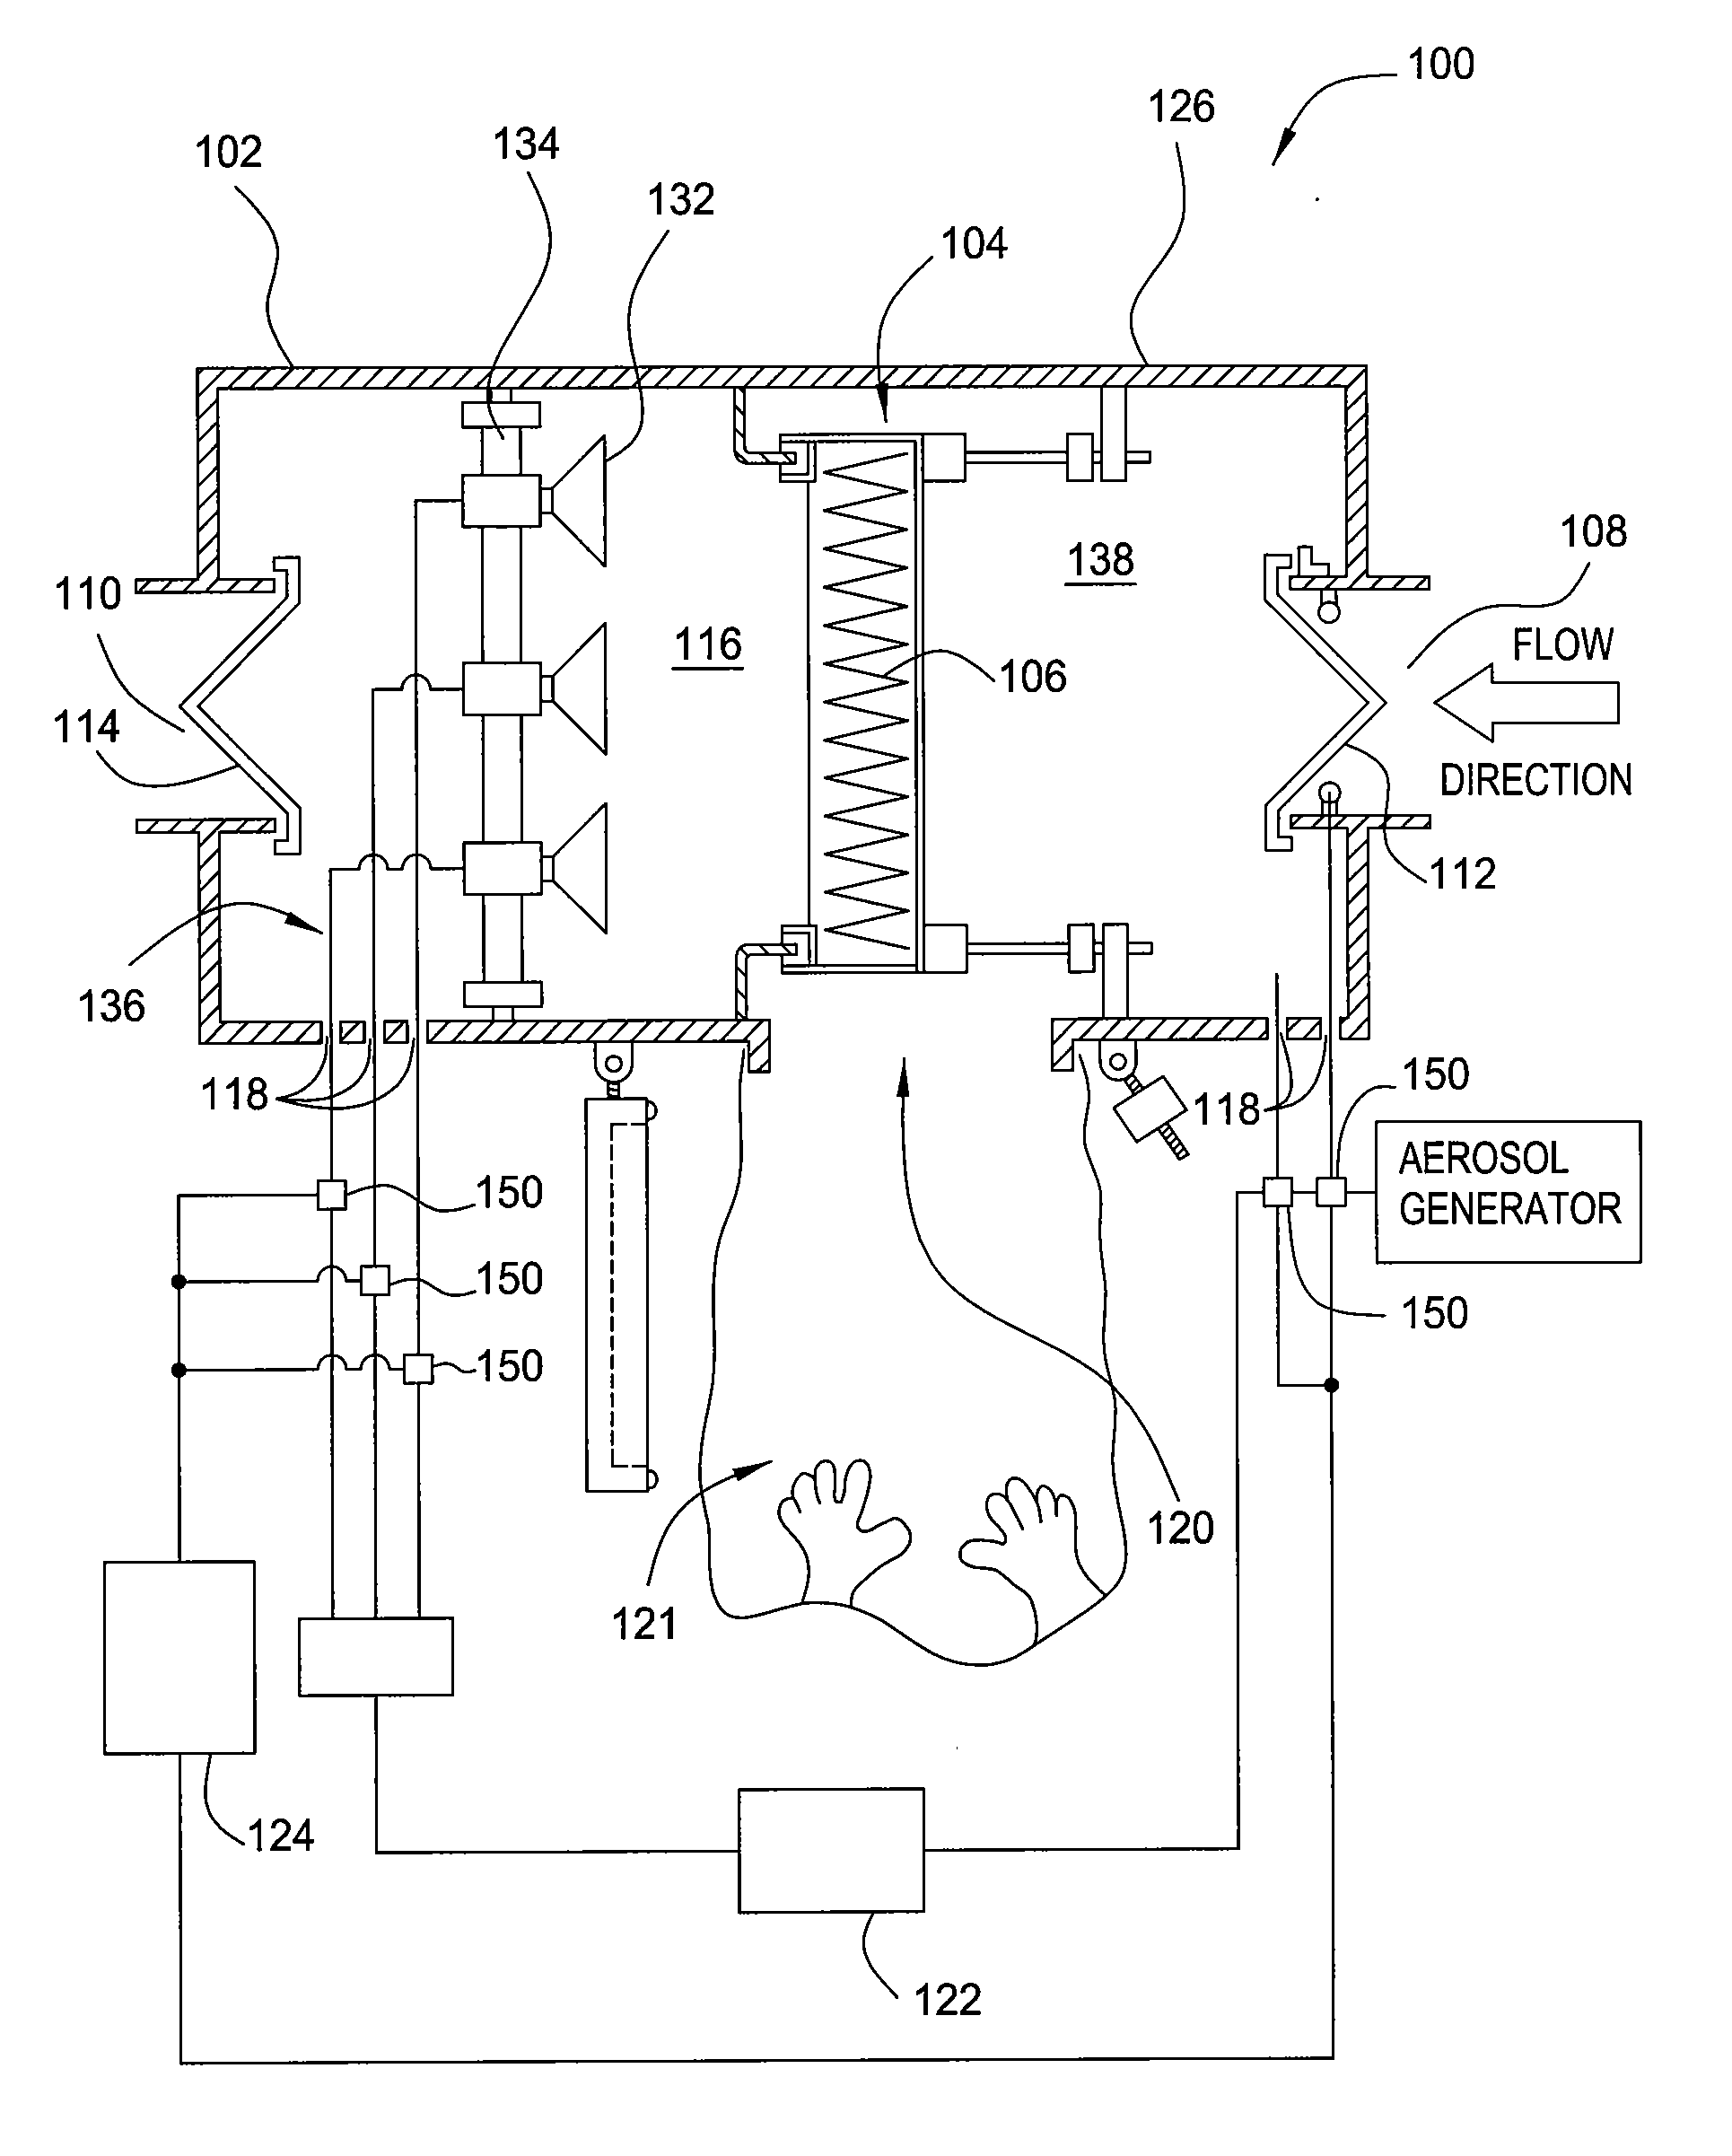 Method and apparatus for in-situ testing of filtration systems